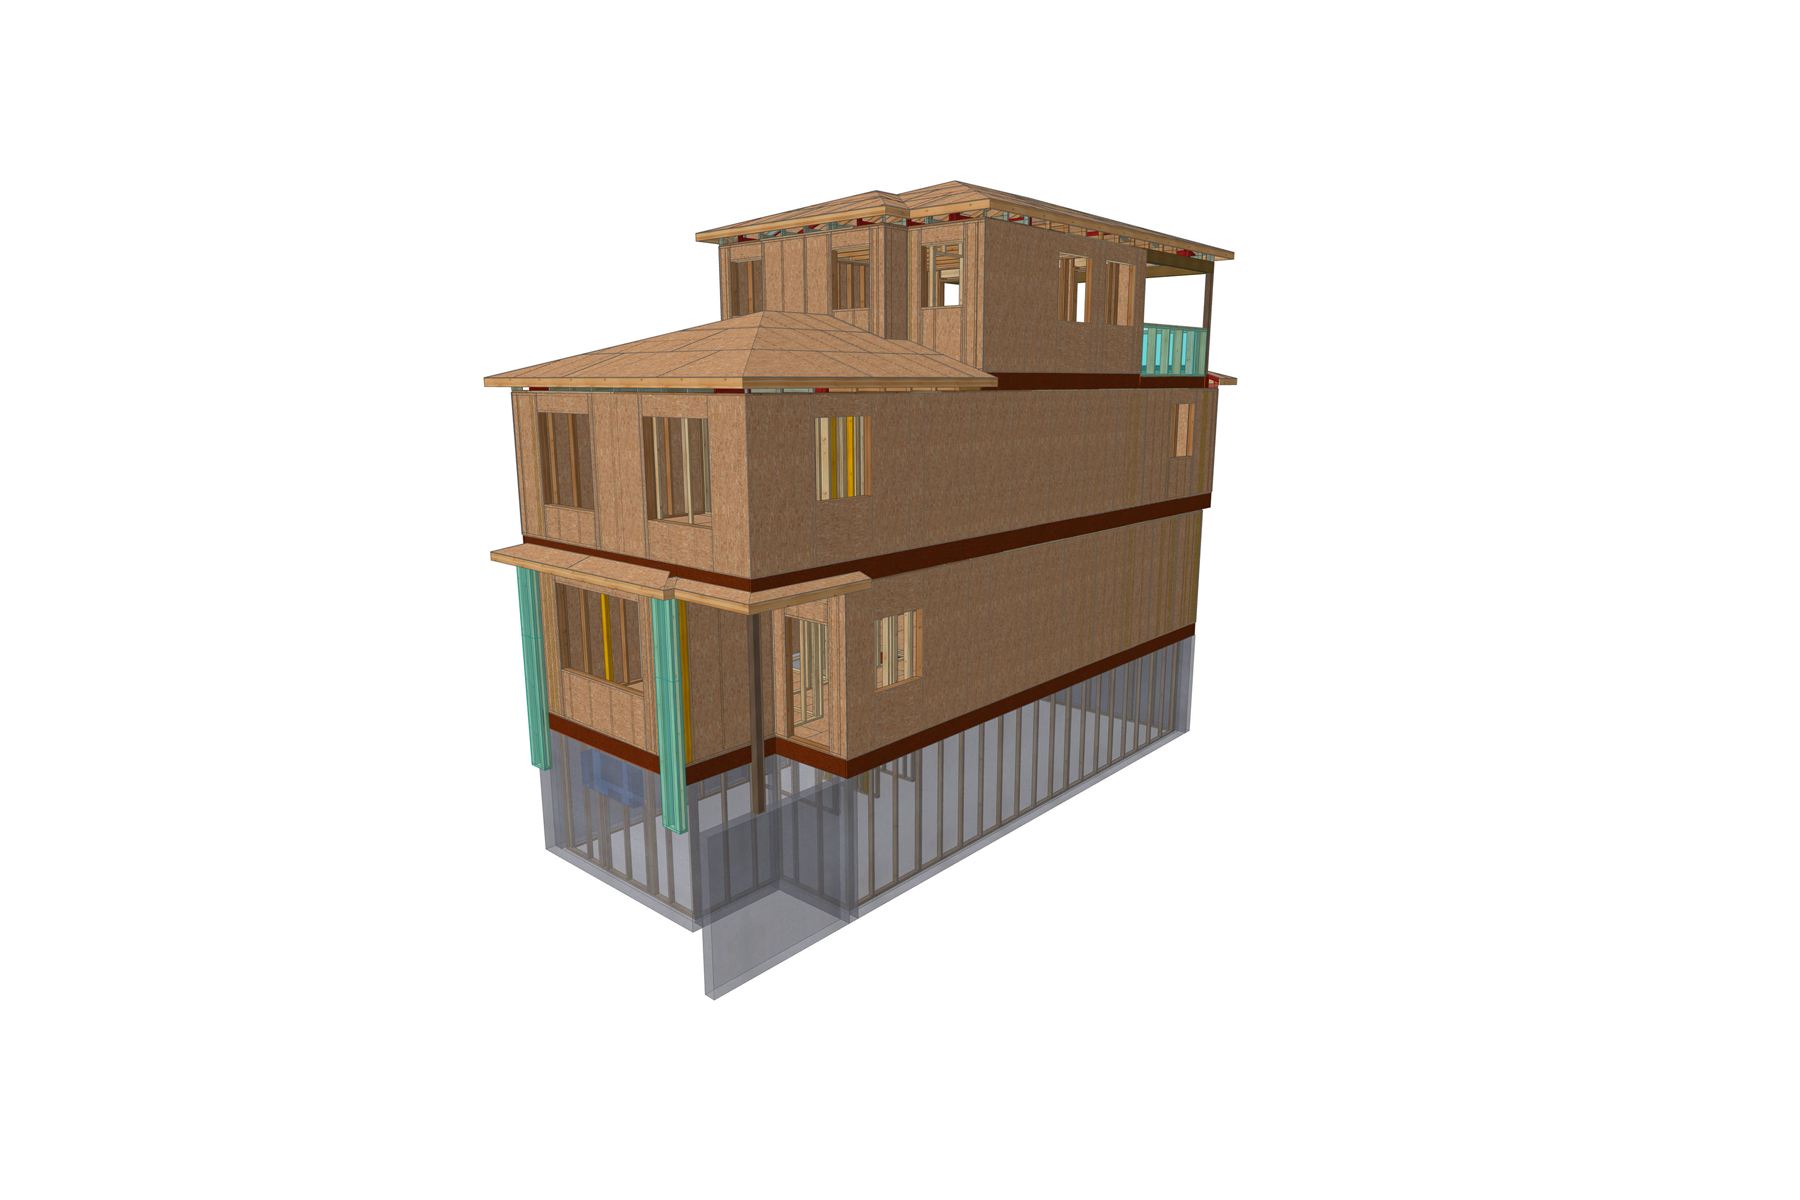 3D model of single family home at framing stage